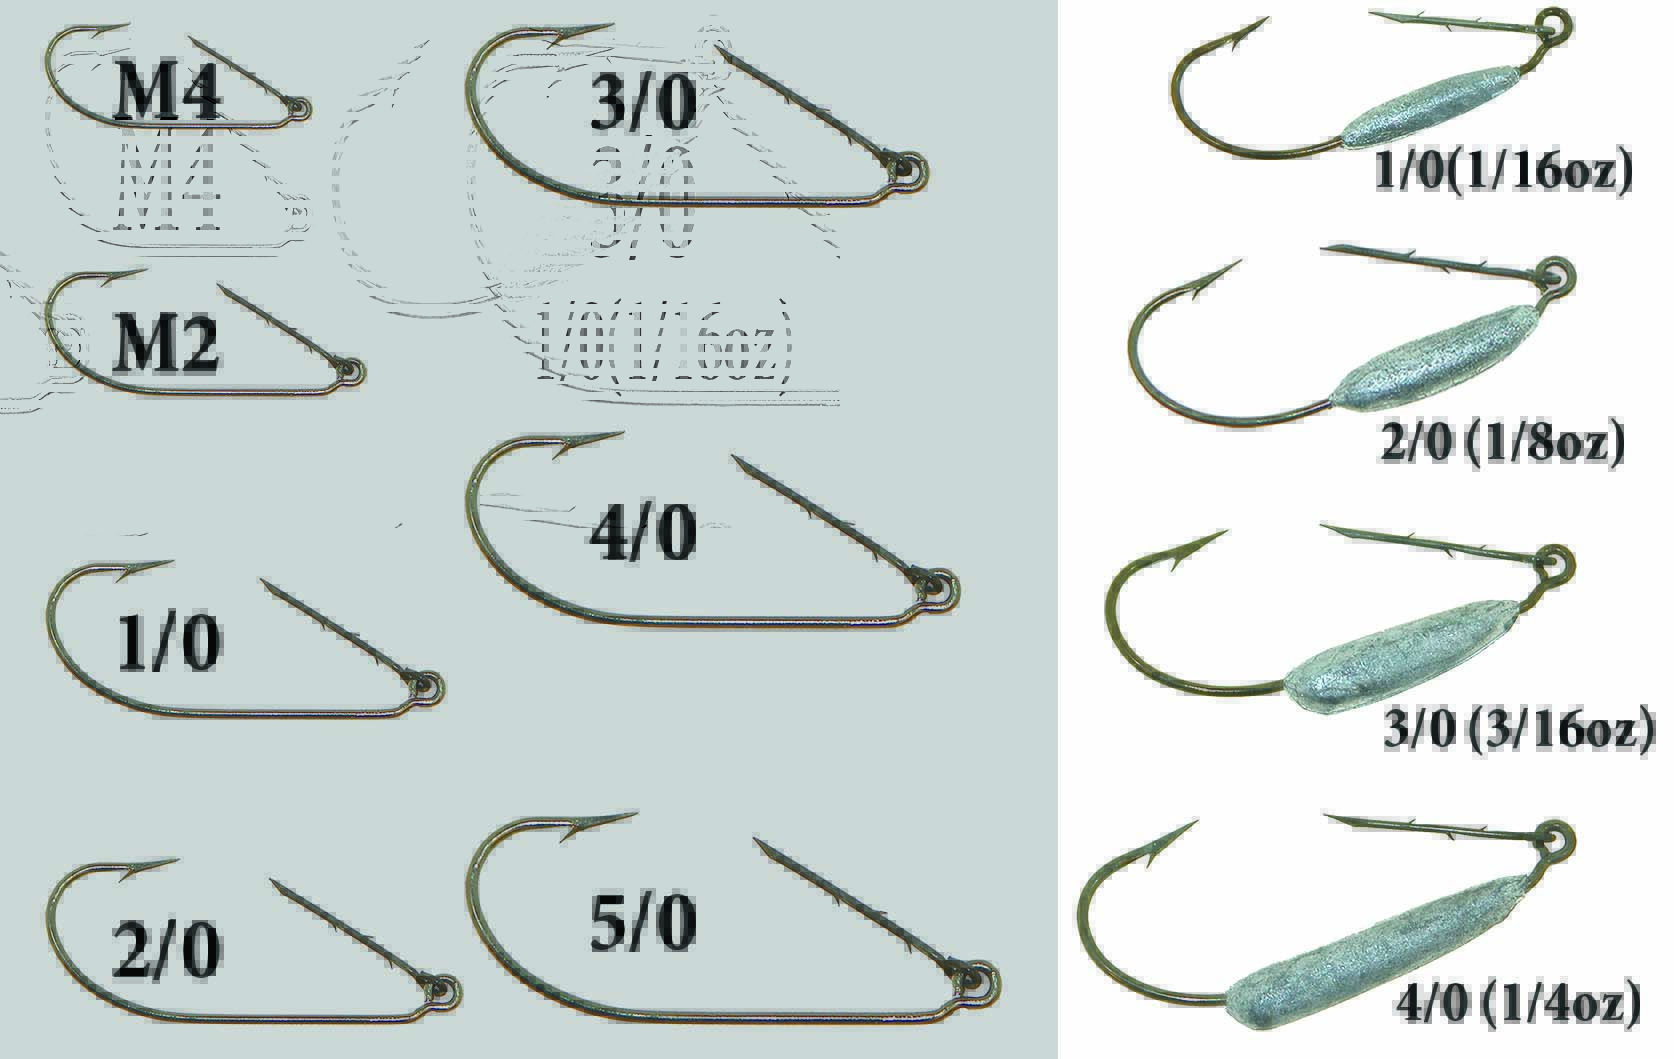 This EWG hook is designed to hook more effectively but at the same